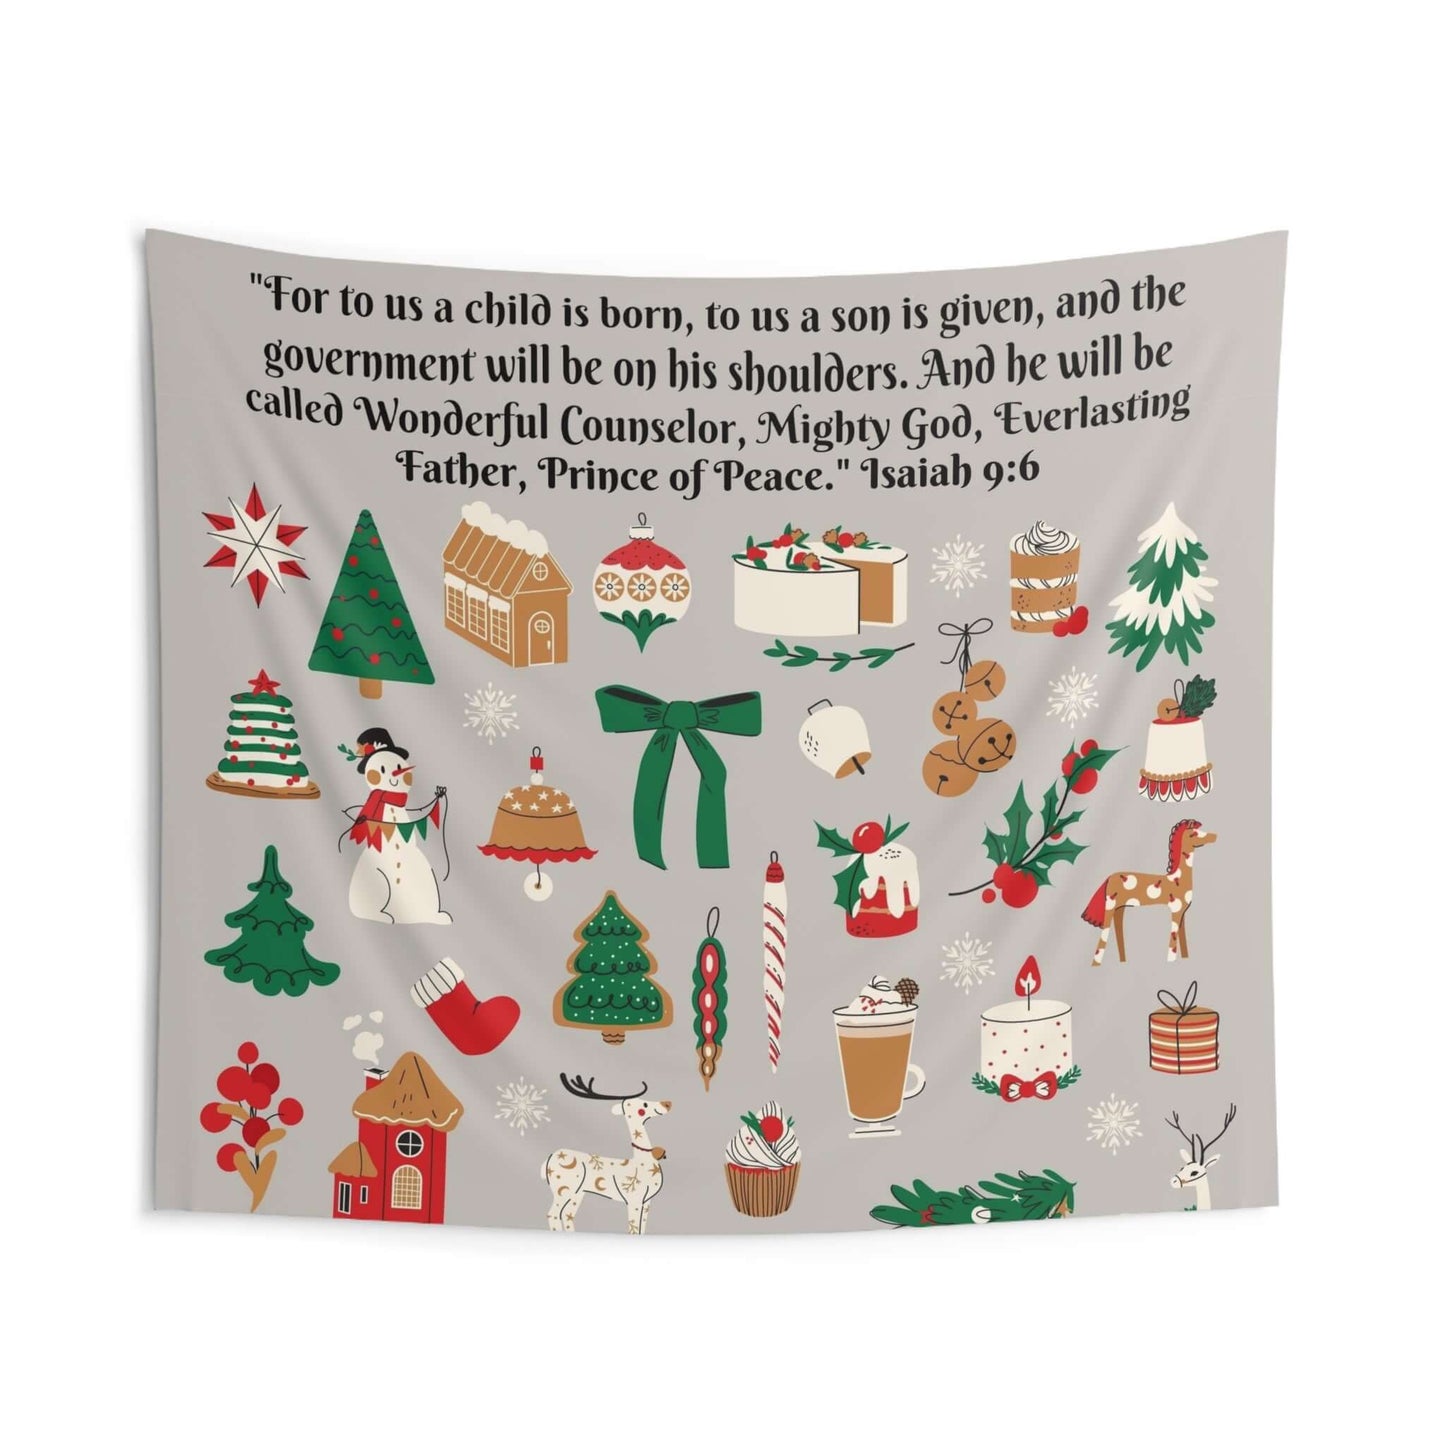 Festive Christmas Wall Tapestry - Isaiah 9:6 | Durable Polyester Decor | Accessories,All Over Print,AOP,Home & Living,Home Decor,Indoor,Summer Picks,Tapestry